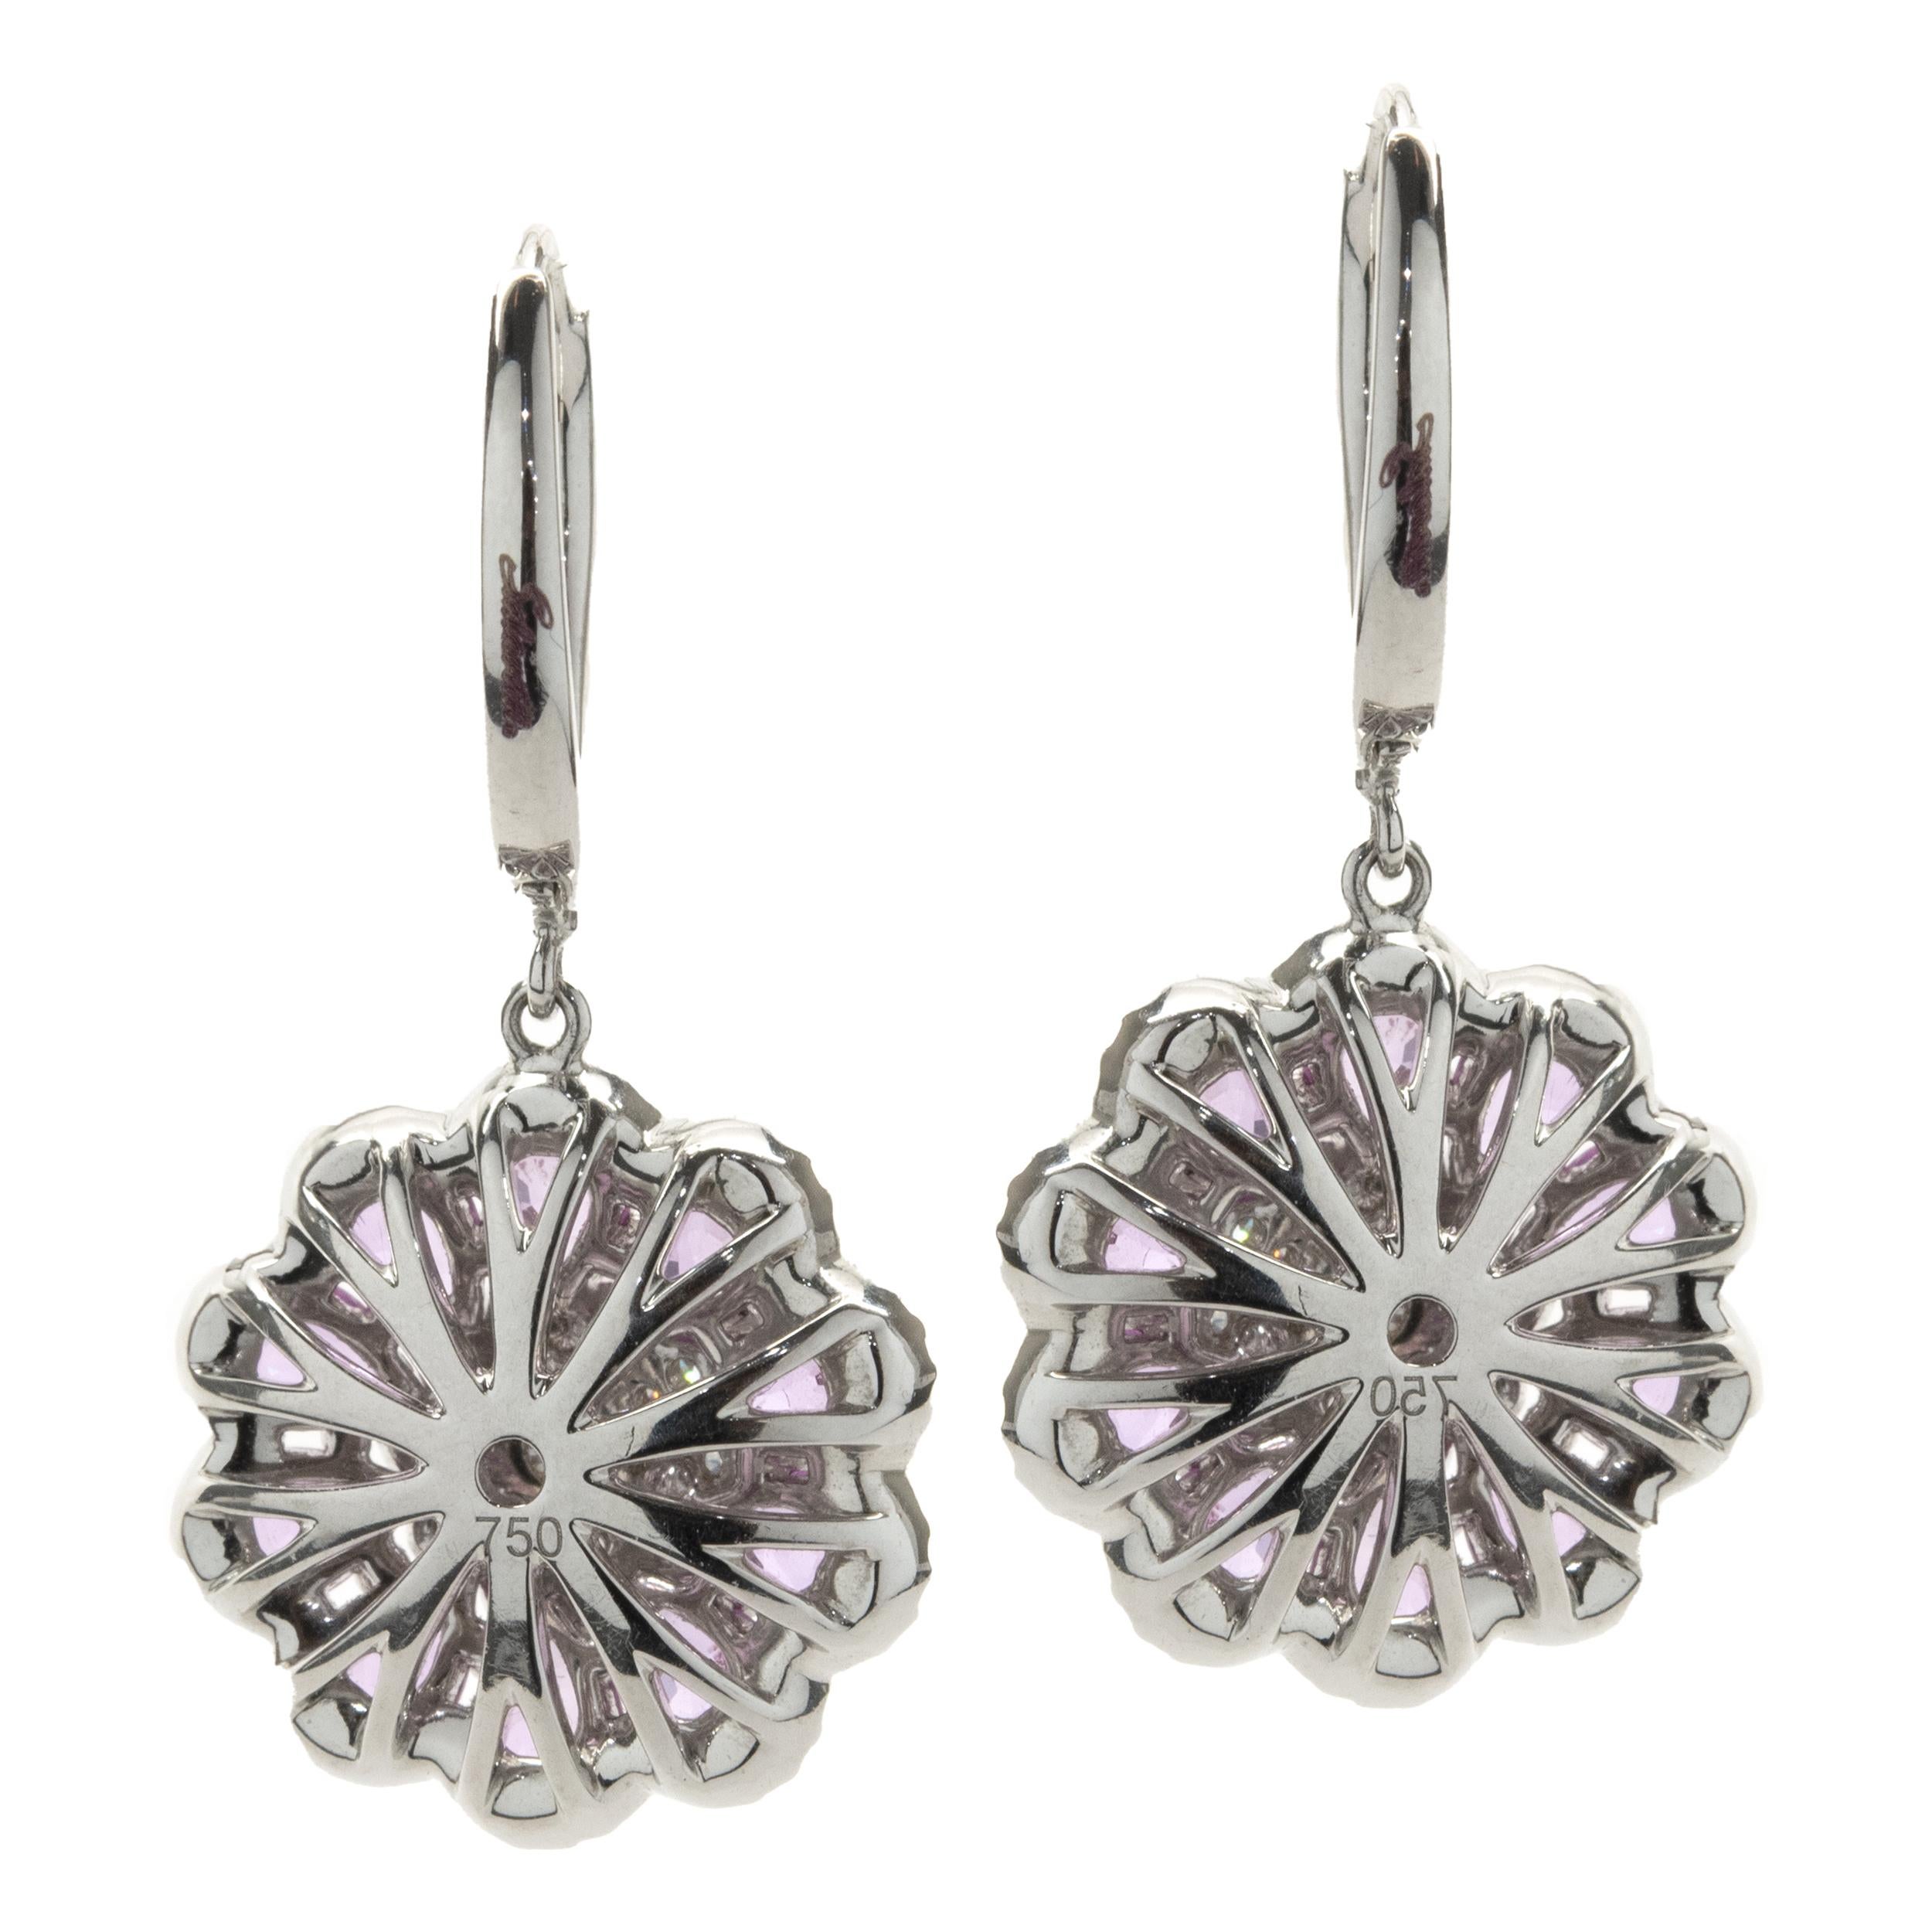 Designer: Salavetti
Material: 18K white gold
Diamond: 58 round brilliant cut = .60cttw
Color: G 
Clarity: VS1
Pink Sapphire: 22 pear cut = 4.50cttw
Weight: 8.00 grams
Dimensions: earrings measure 30 X 15.80mm
